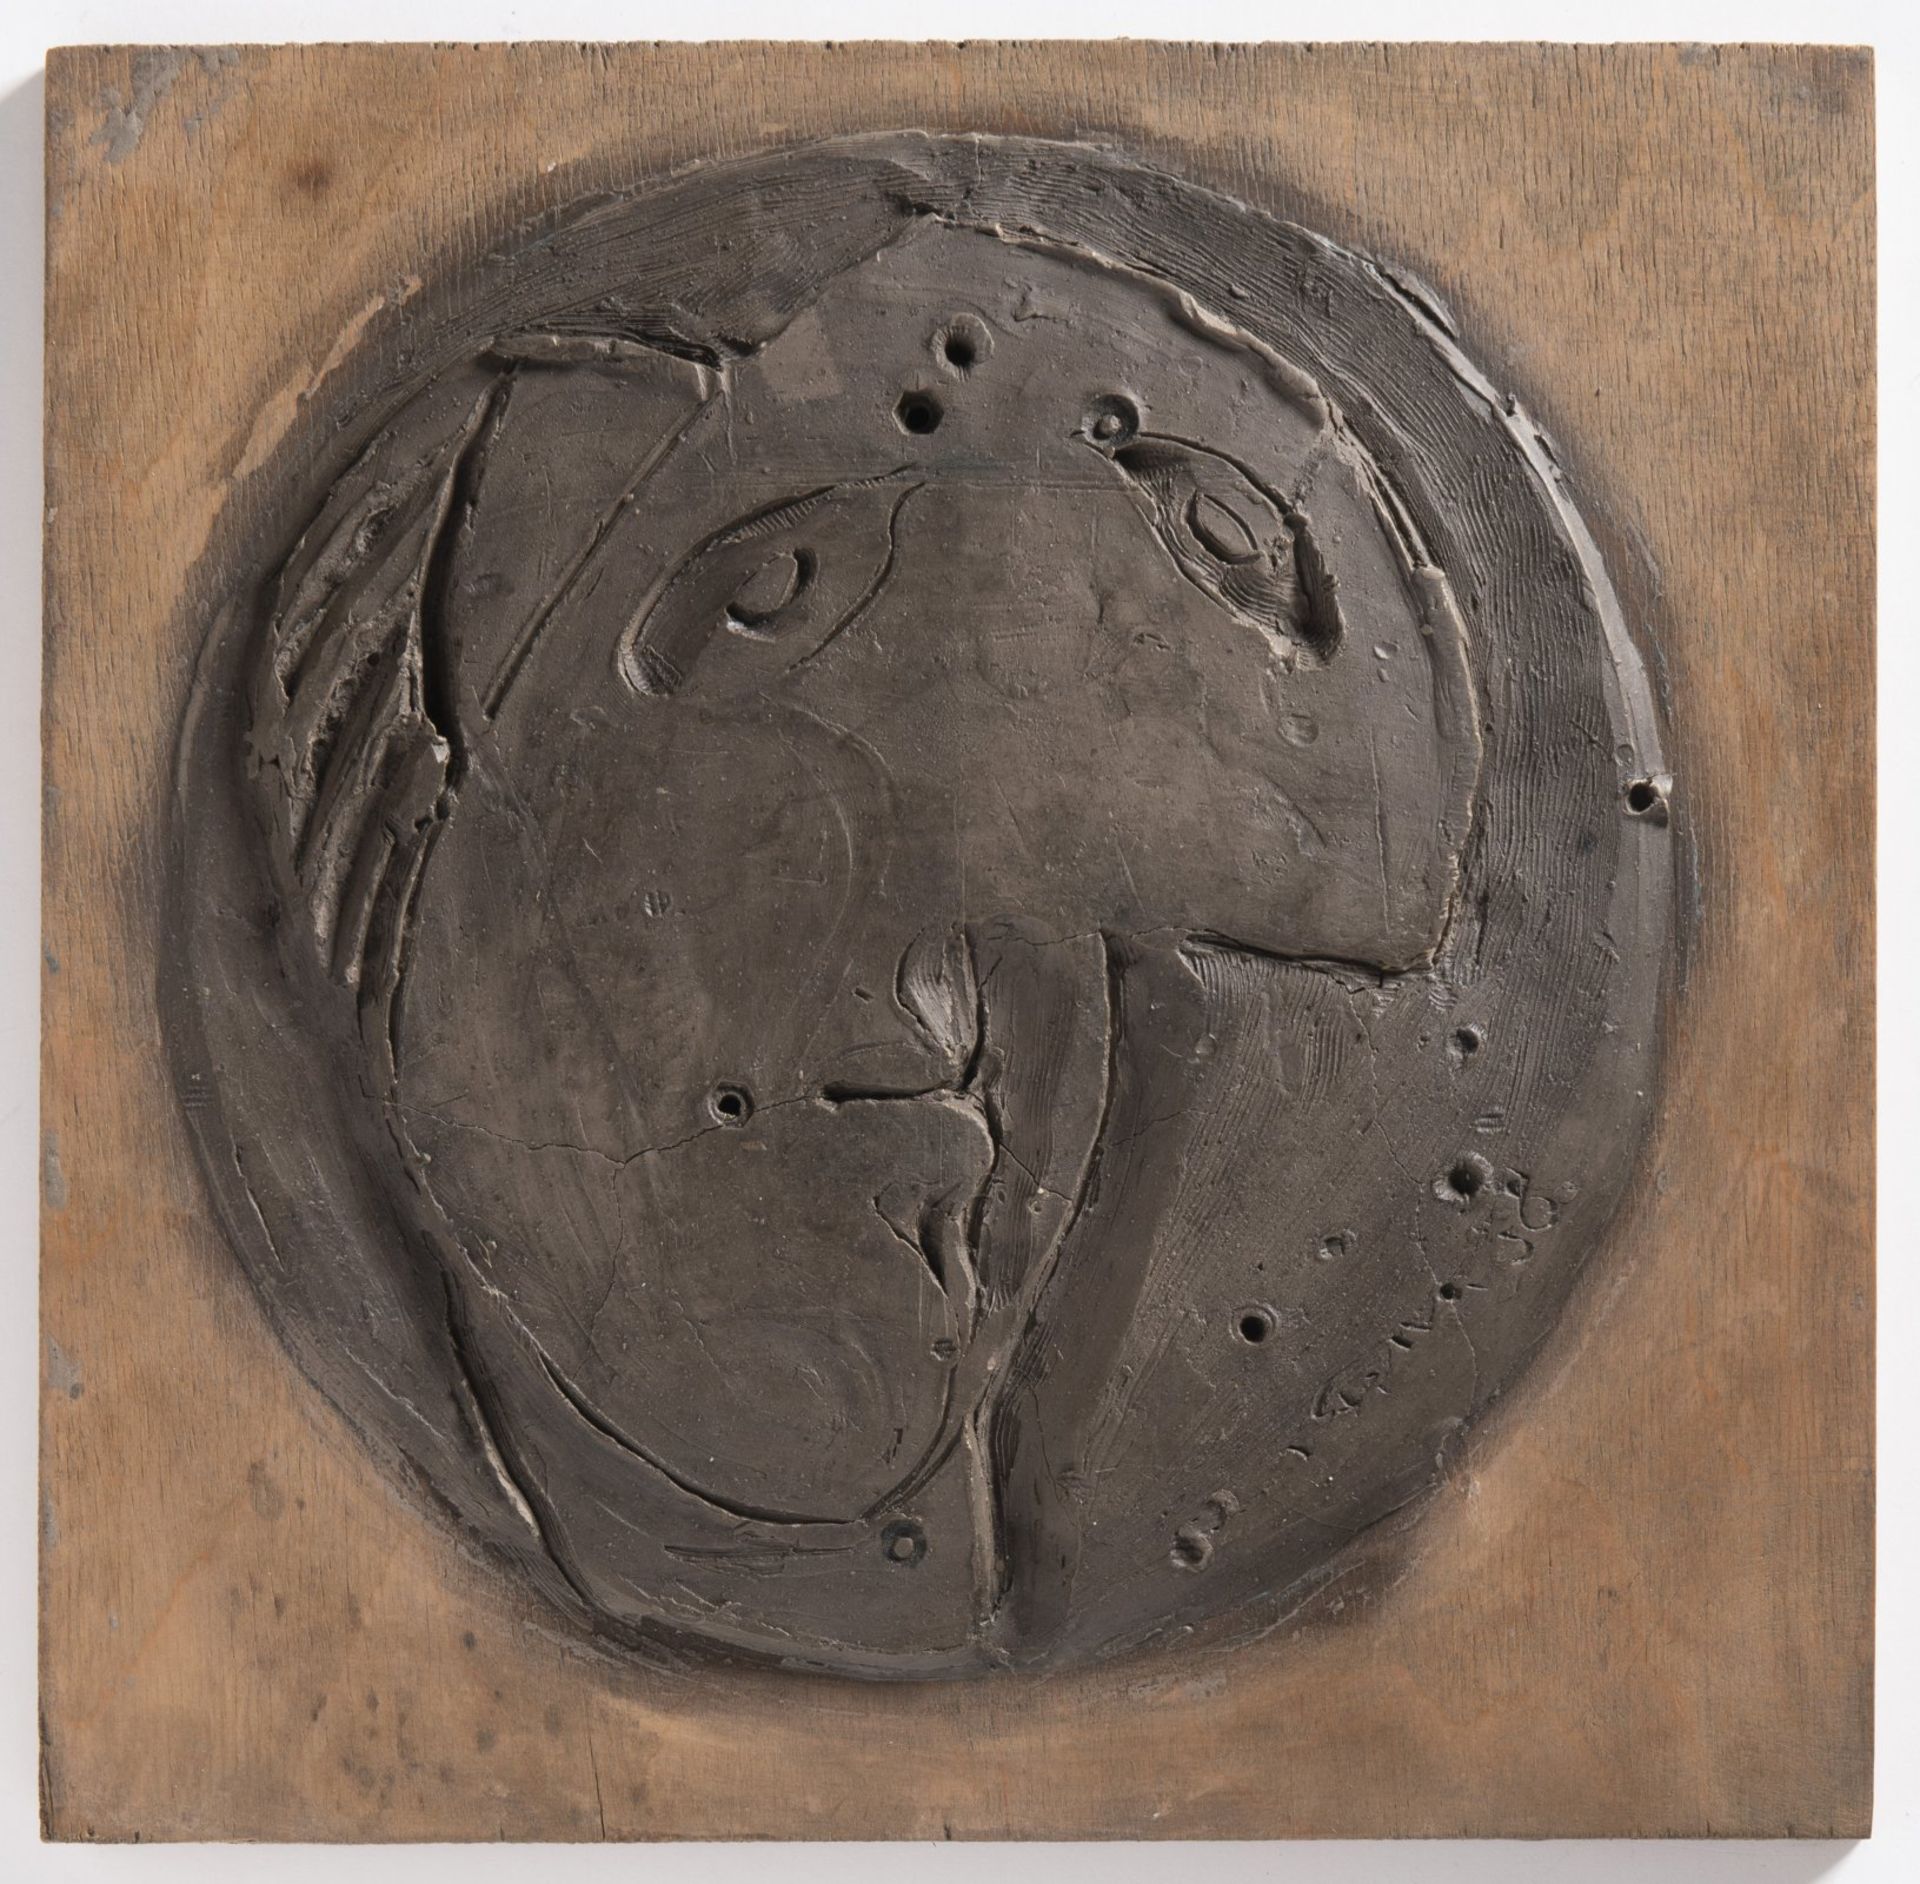 EMIL FILLA 1882 - 1953: A WOMAN 1938 Modelling clay on plywood 25 x 25,5 cm Signed: Lower right "